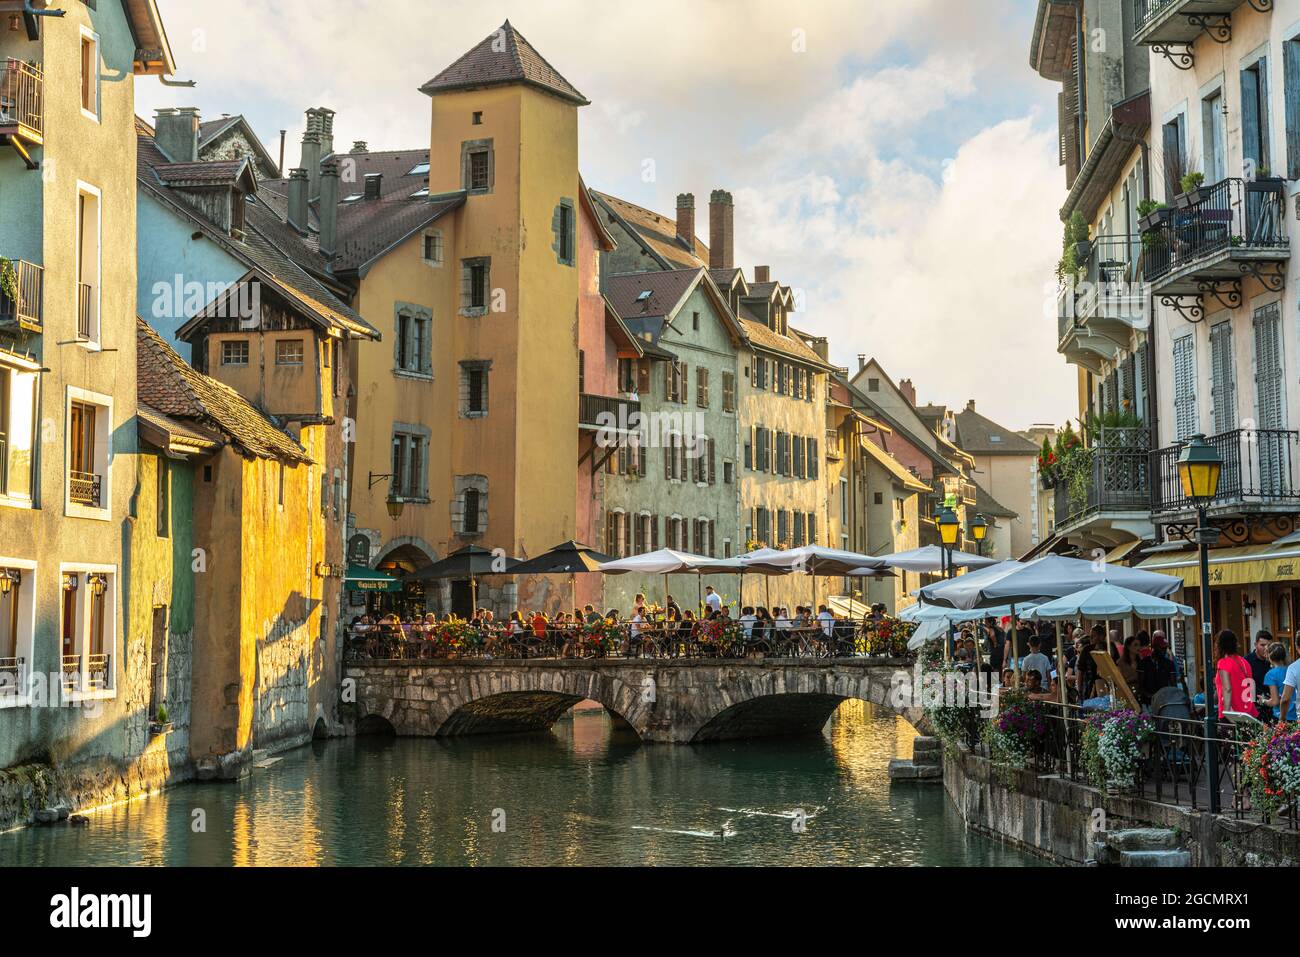 Tourists strolling through the streets of the ancient city of Annecy. The bridges connect the two banks of the Thiou River. Annecy, France Stock Photo